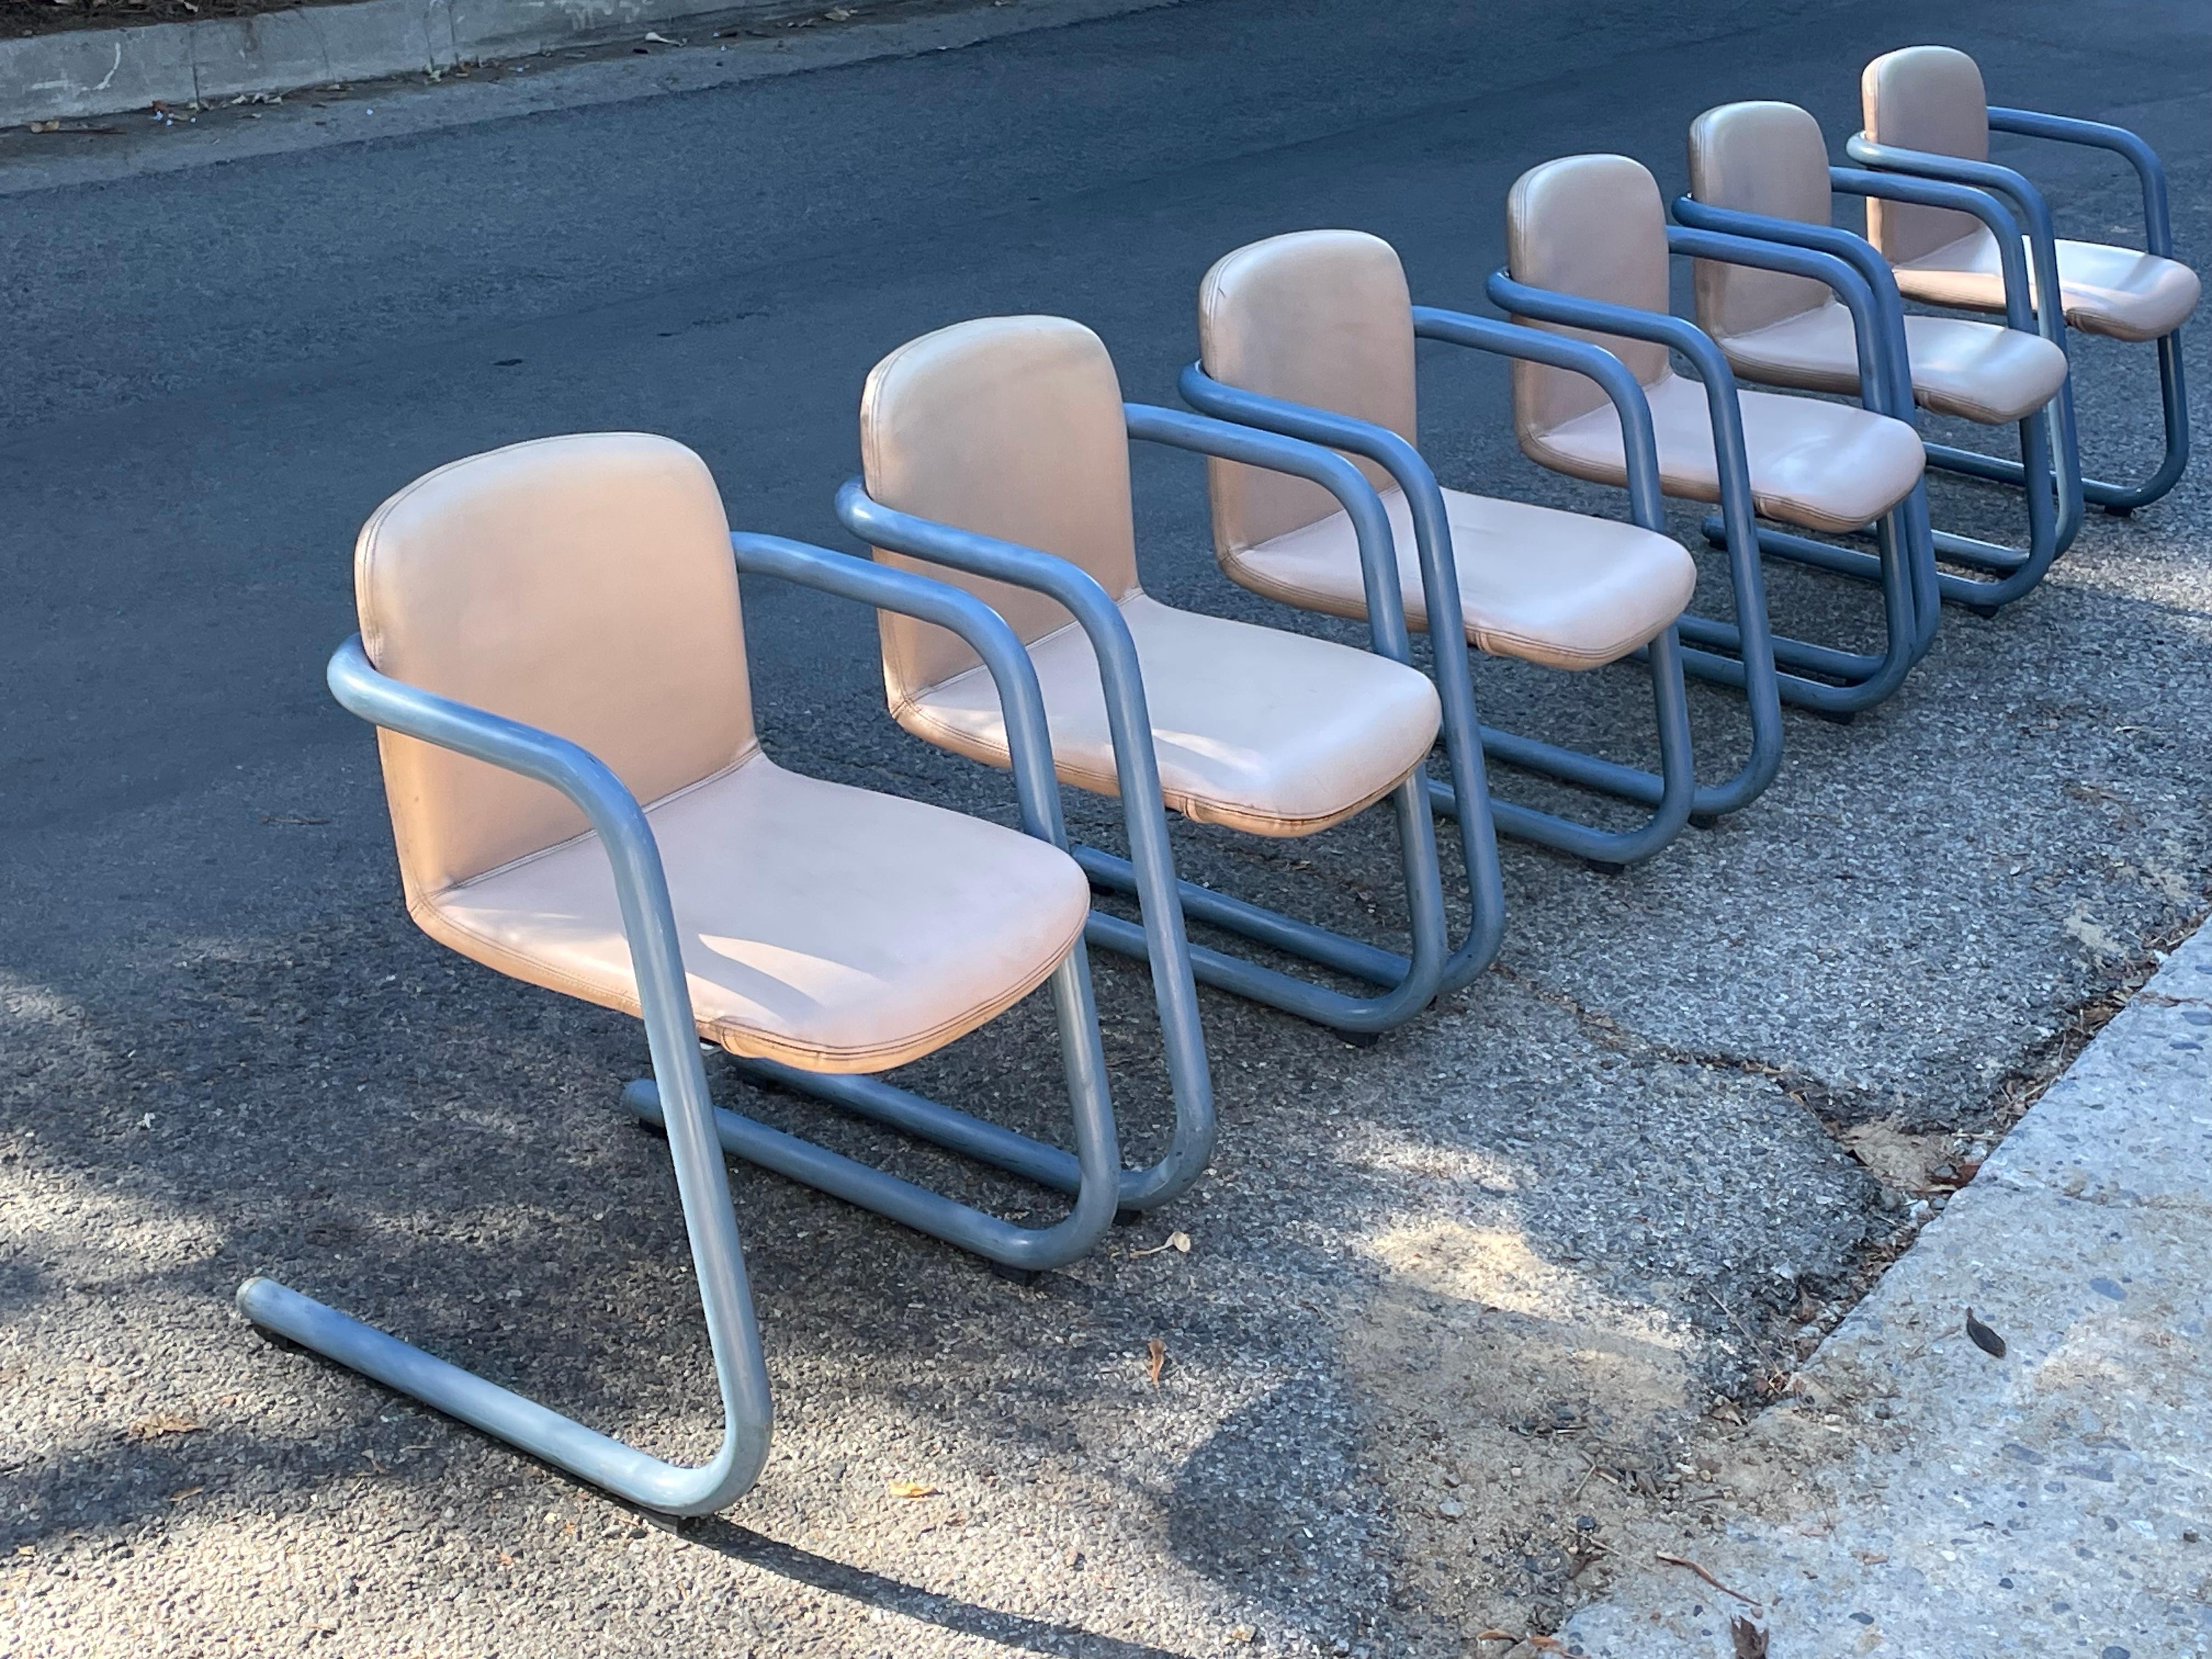 Set of 6 Vintage Kinetics Blue & Tan 100/300 Chairs, circa 1970’s. Designed by Philip Salmon and Hugh Hamilton for Kinetics.

Really cool. Price is for the set of six.

Very good vintage condition with minor flaws as expected with age. See